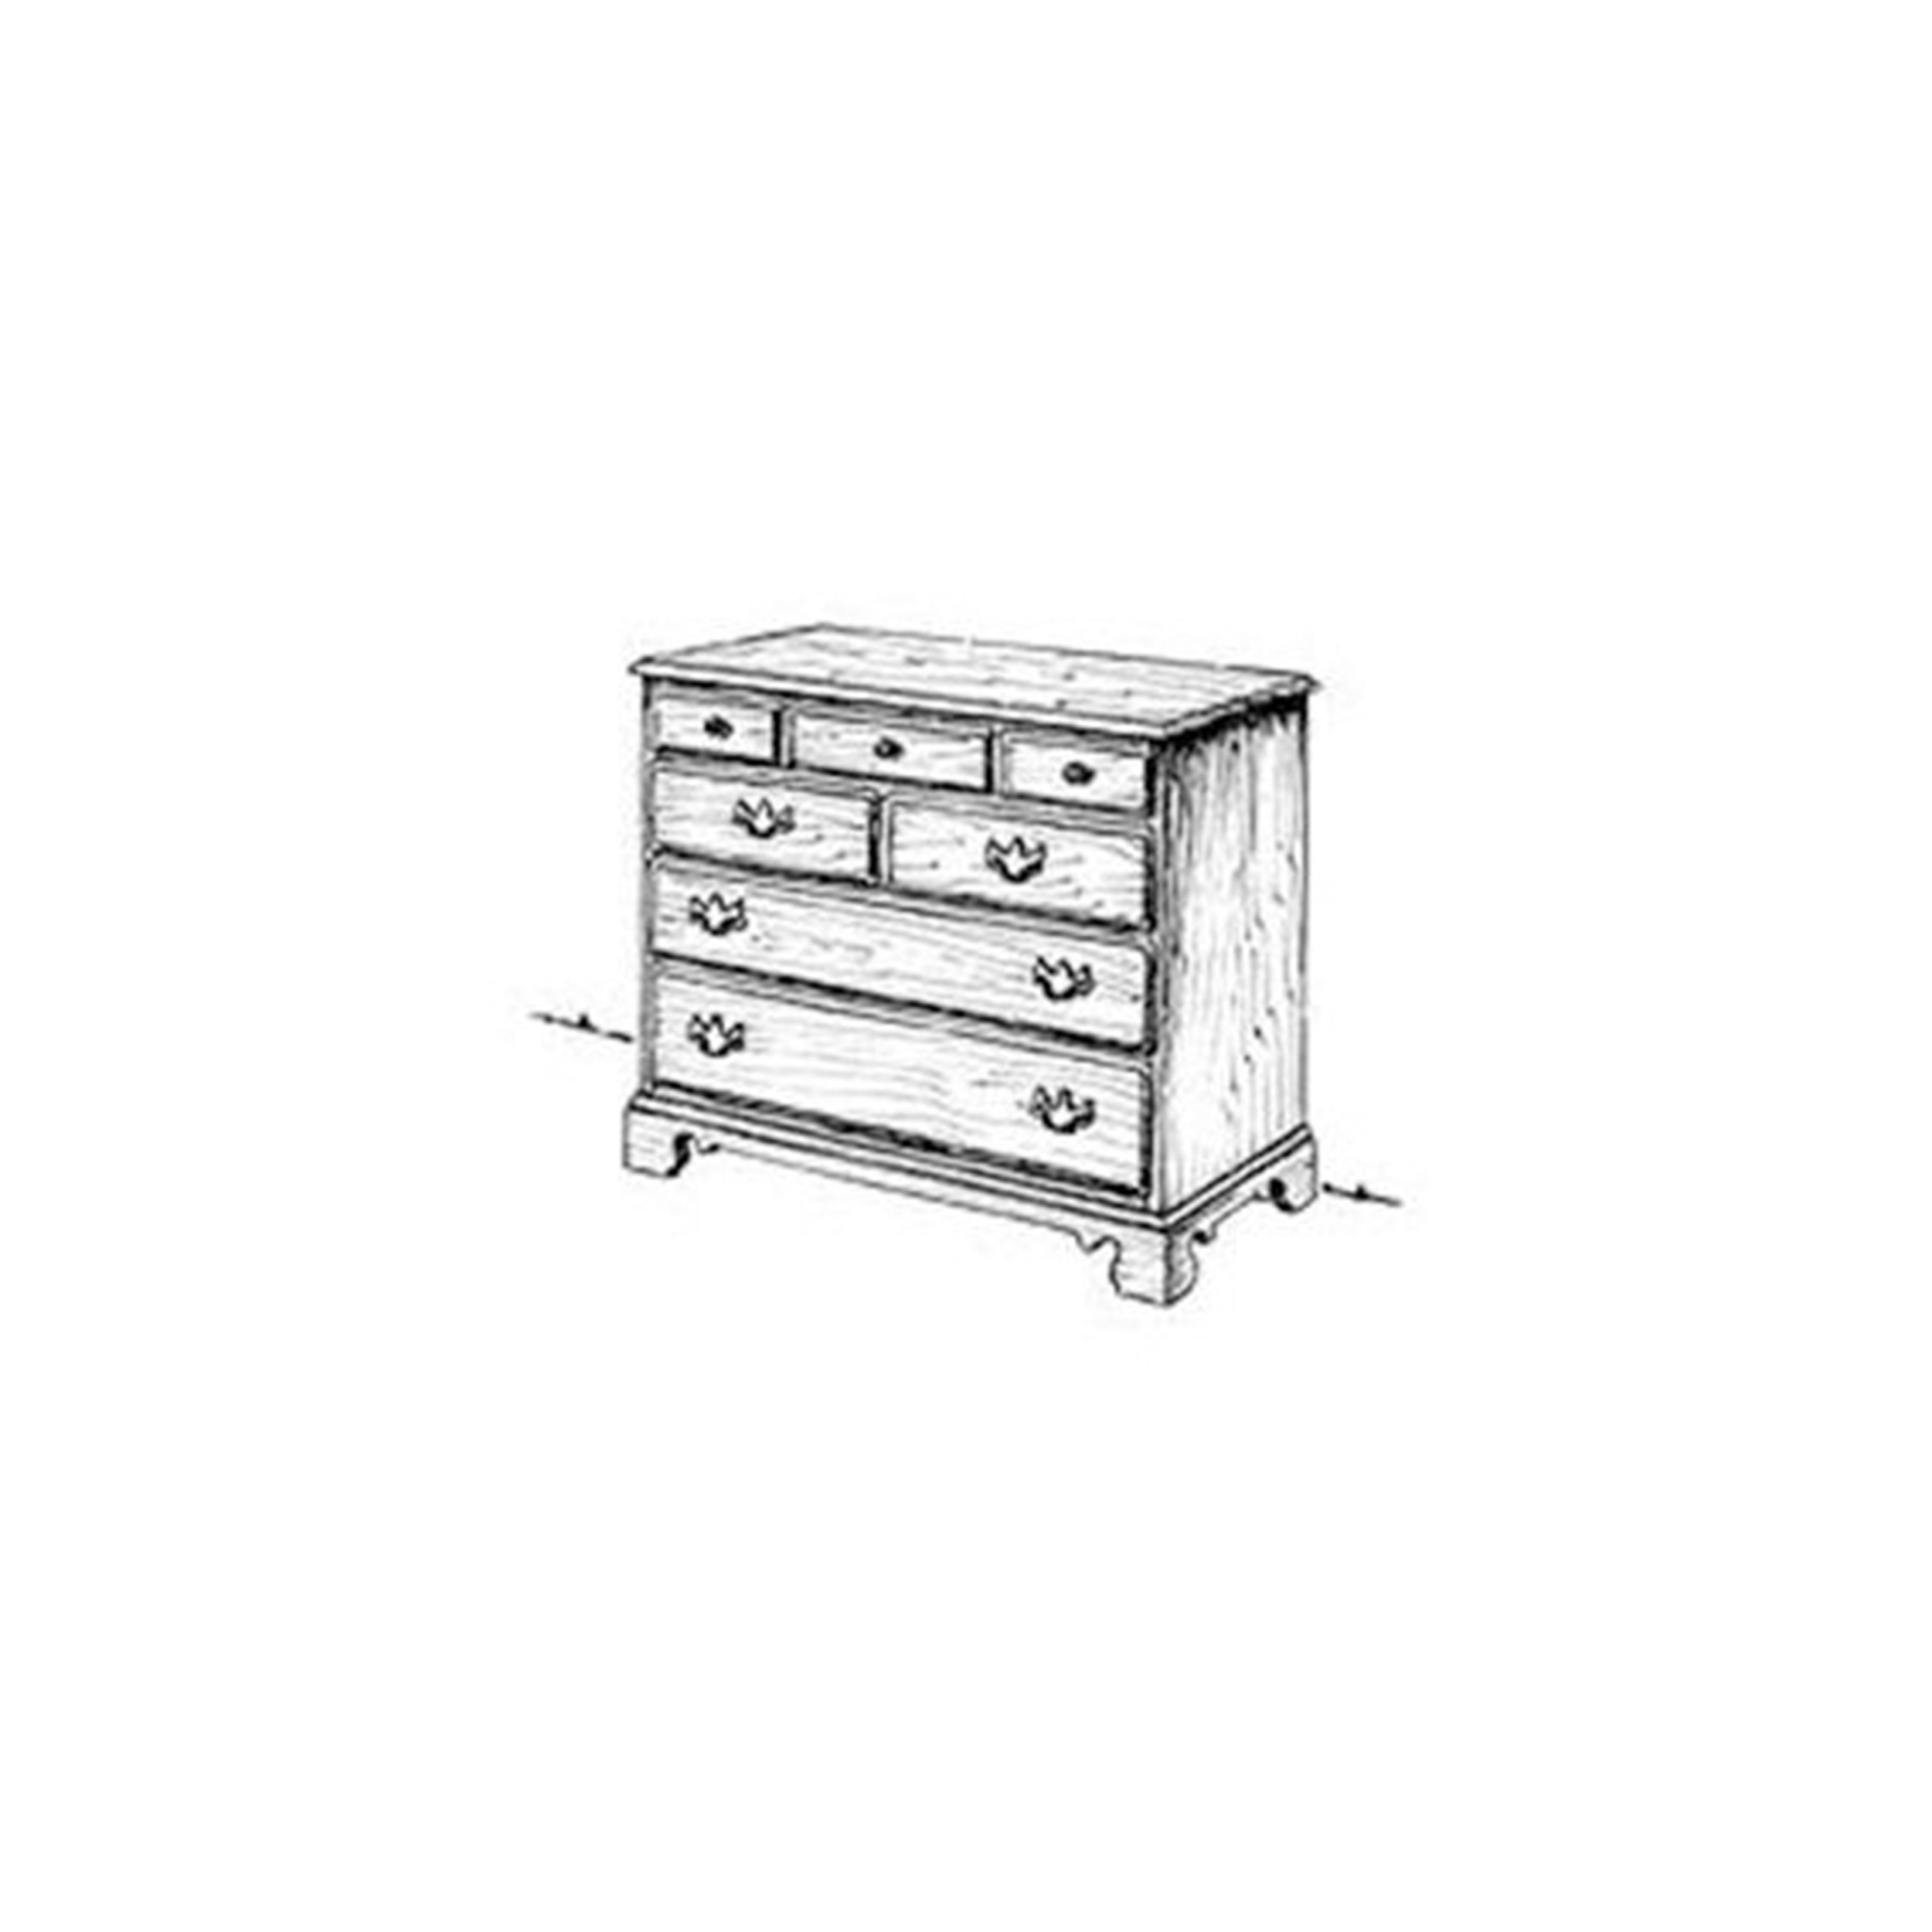 Woodworking Project Paper Plan To Build Chippendale Chest